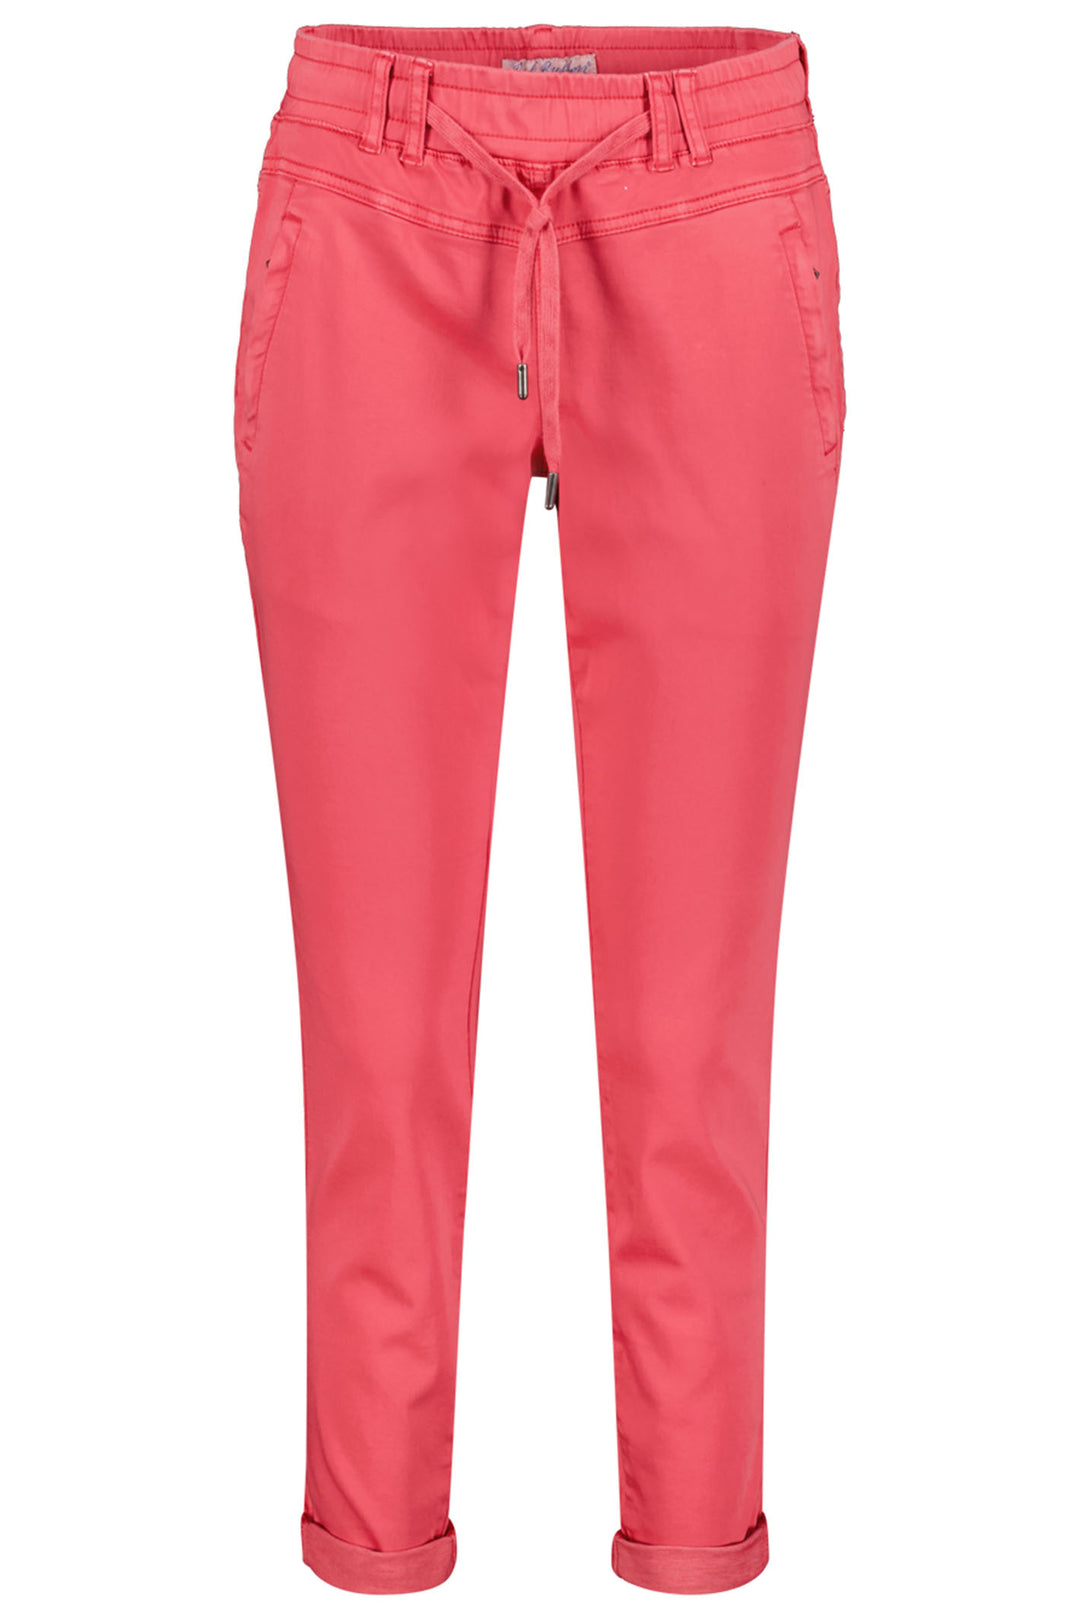 Red Button SRB4154 Coral Tessy Jogger Trousers 74cm - Olivia Grace Fashion